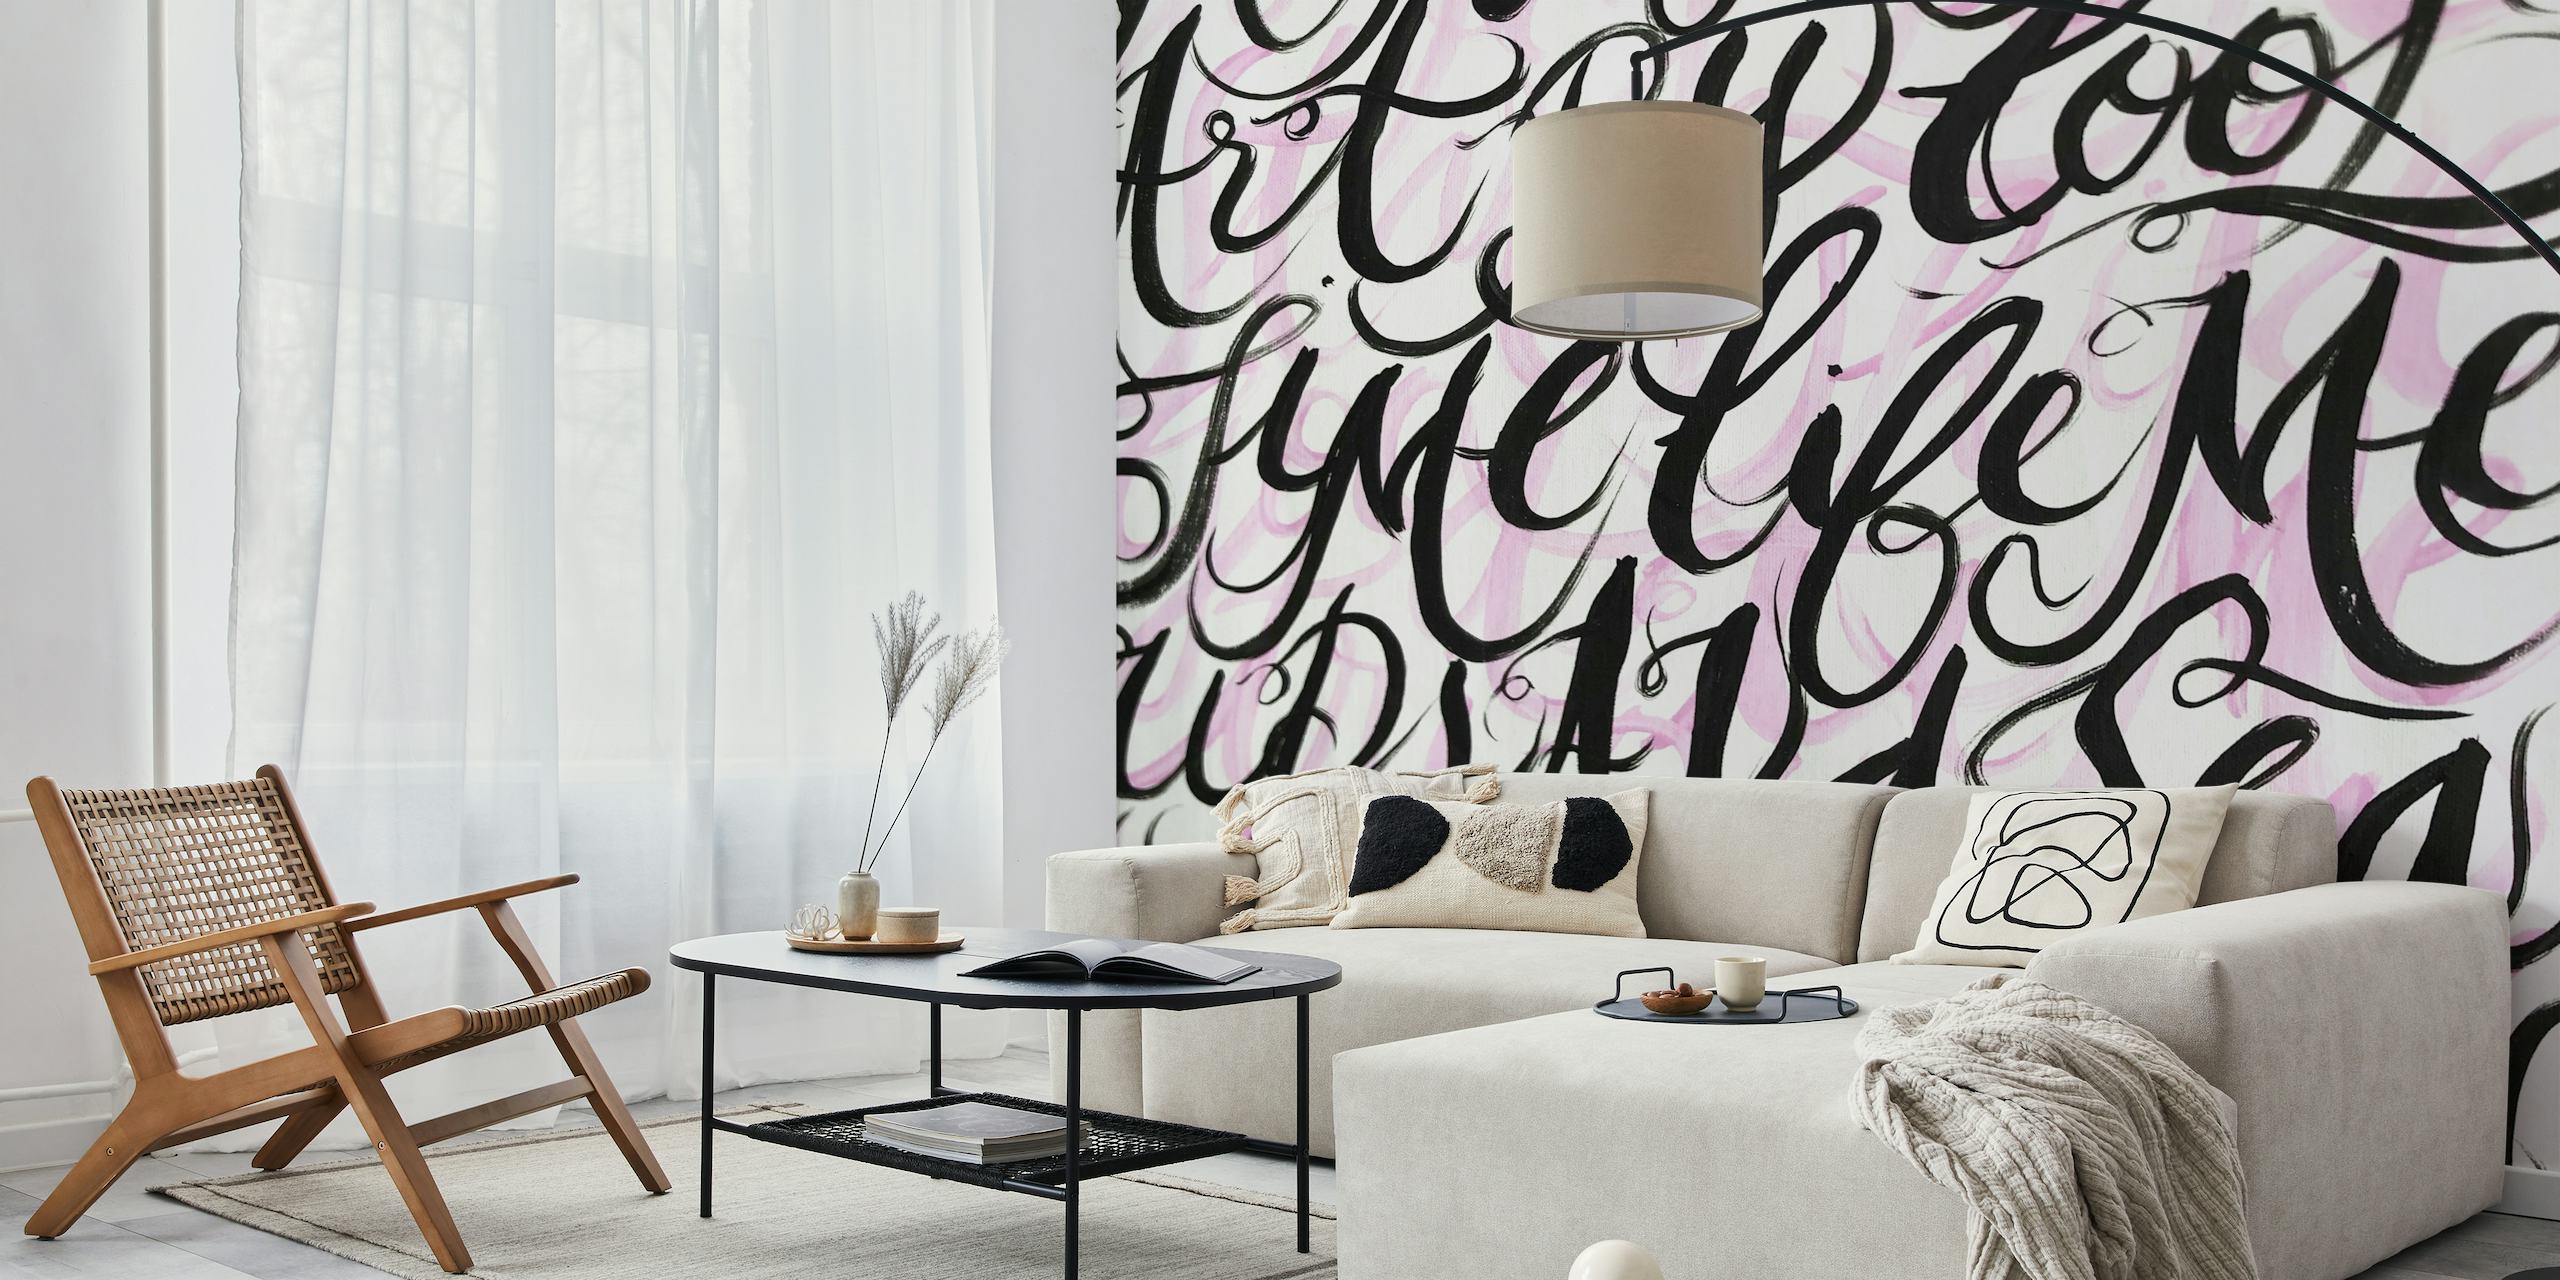 Abstract black and white calligraphy wall mural design